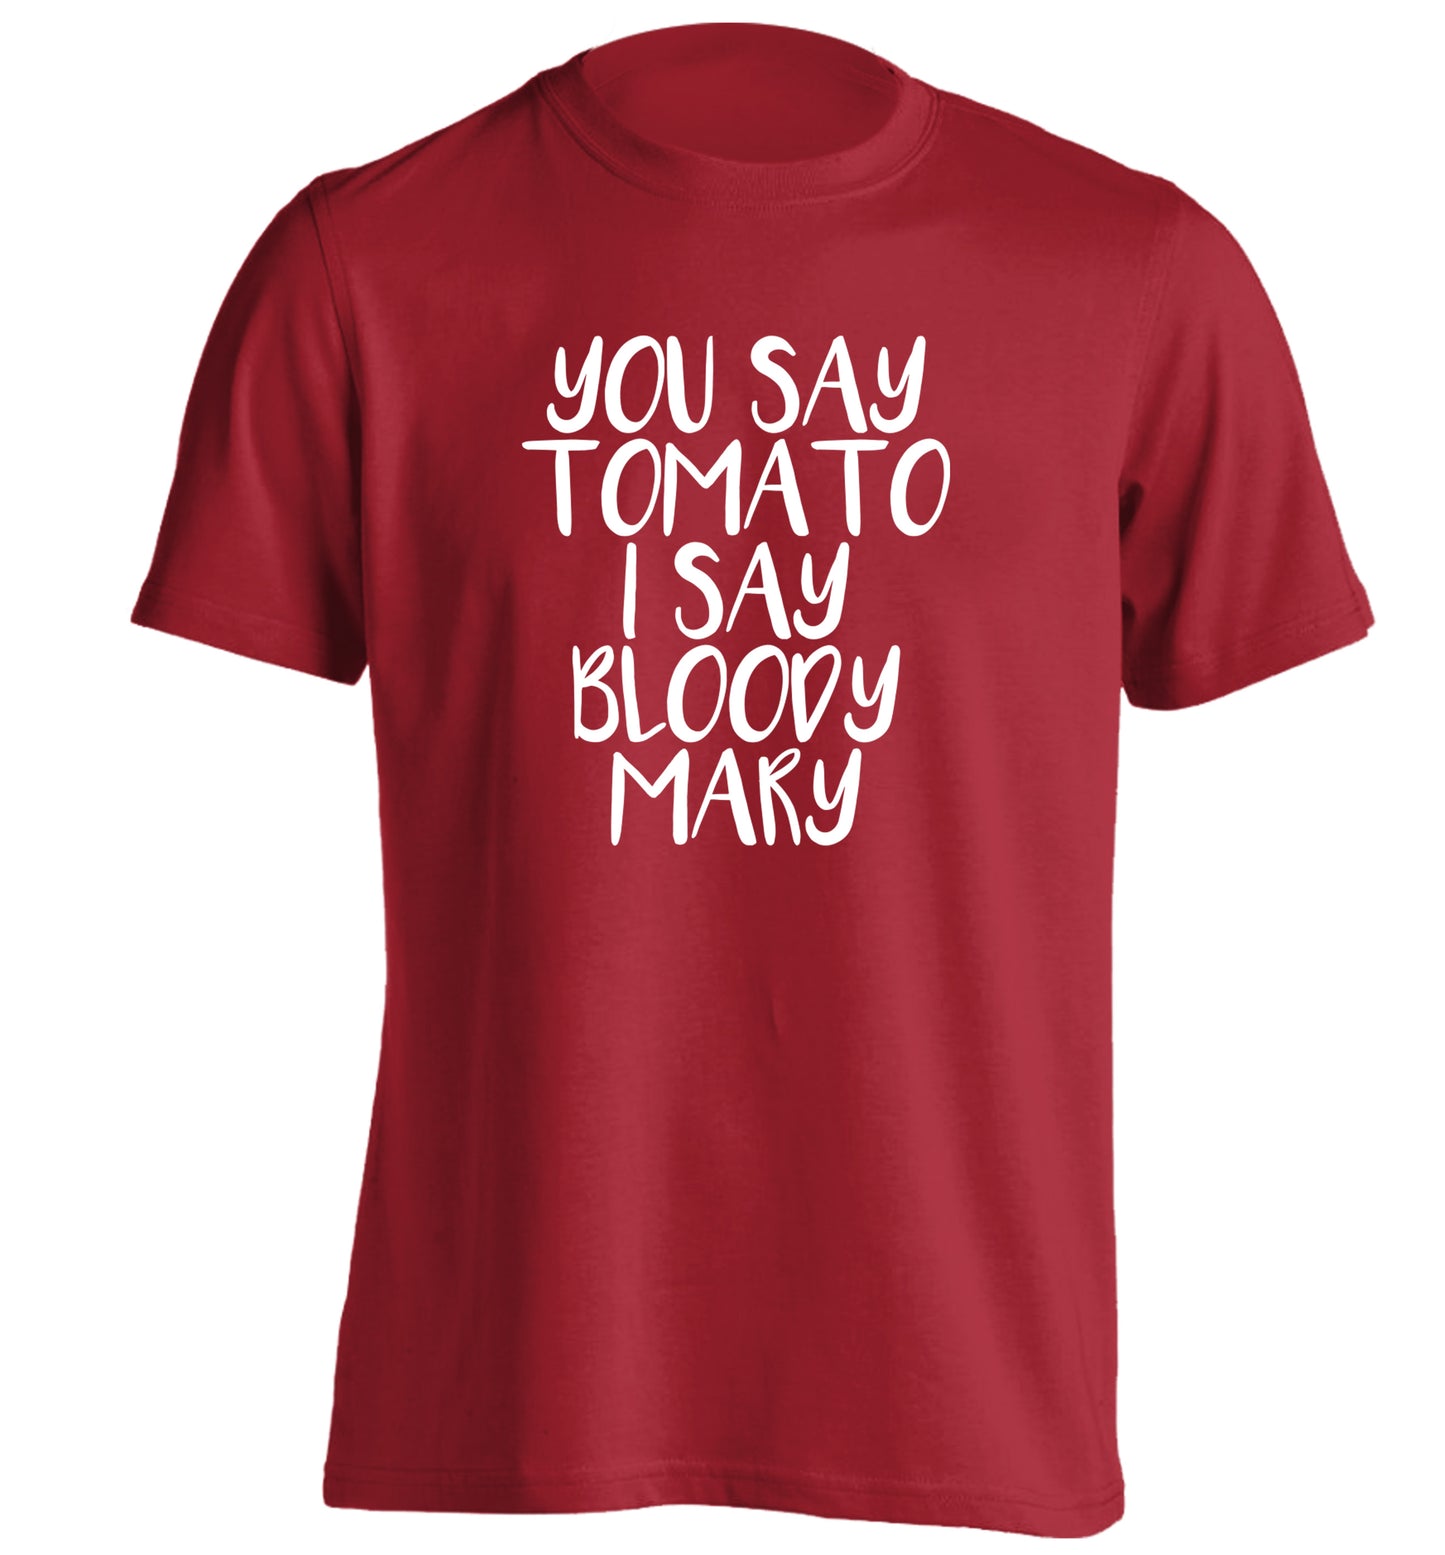 You say tomato I say bloody mary adults unisex red Tshirt 2XL